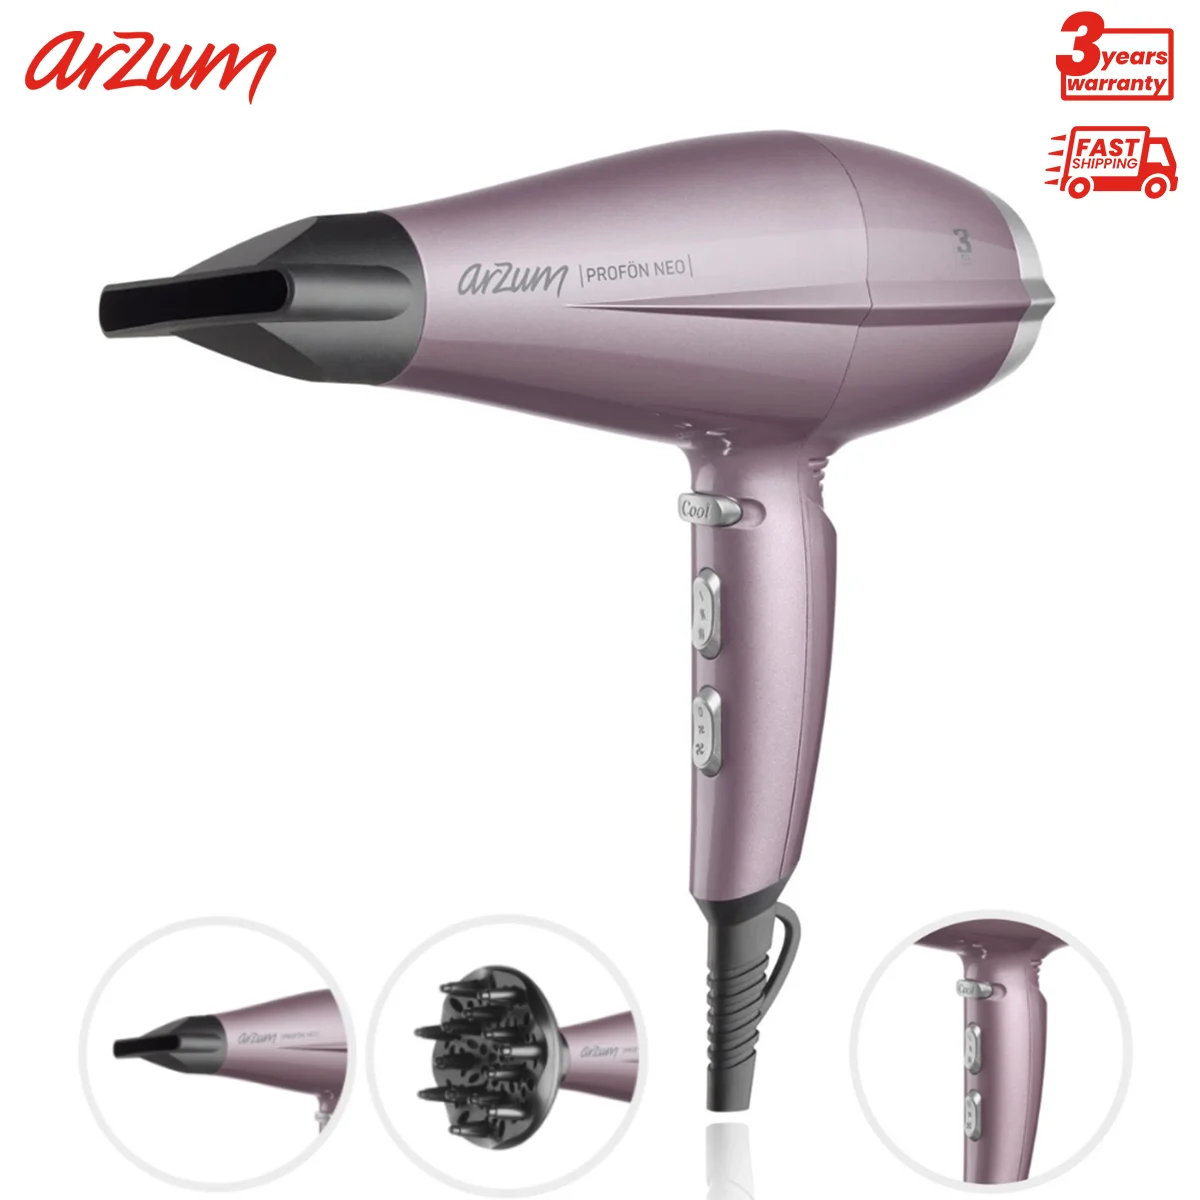 Arzum Profön Neo Professional Hair Dryer 2300W Professional Hair Dryer Strong Wind Salon Hair Dryer Hot & Cold Drying High Speed Hairdryer Temeperature Control Salon Dryer Hot &Cold Wind